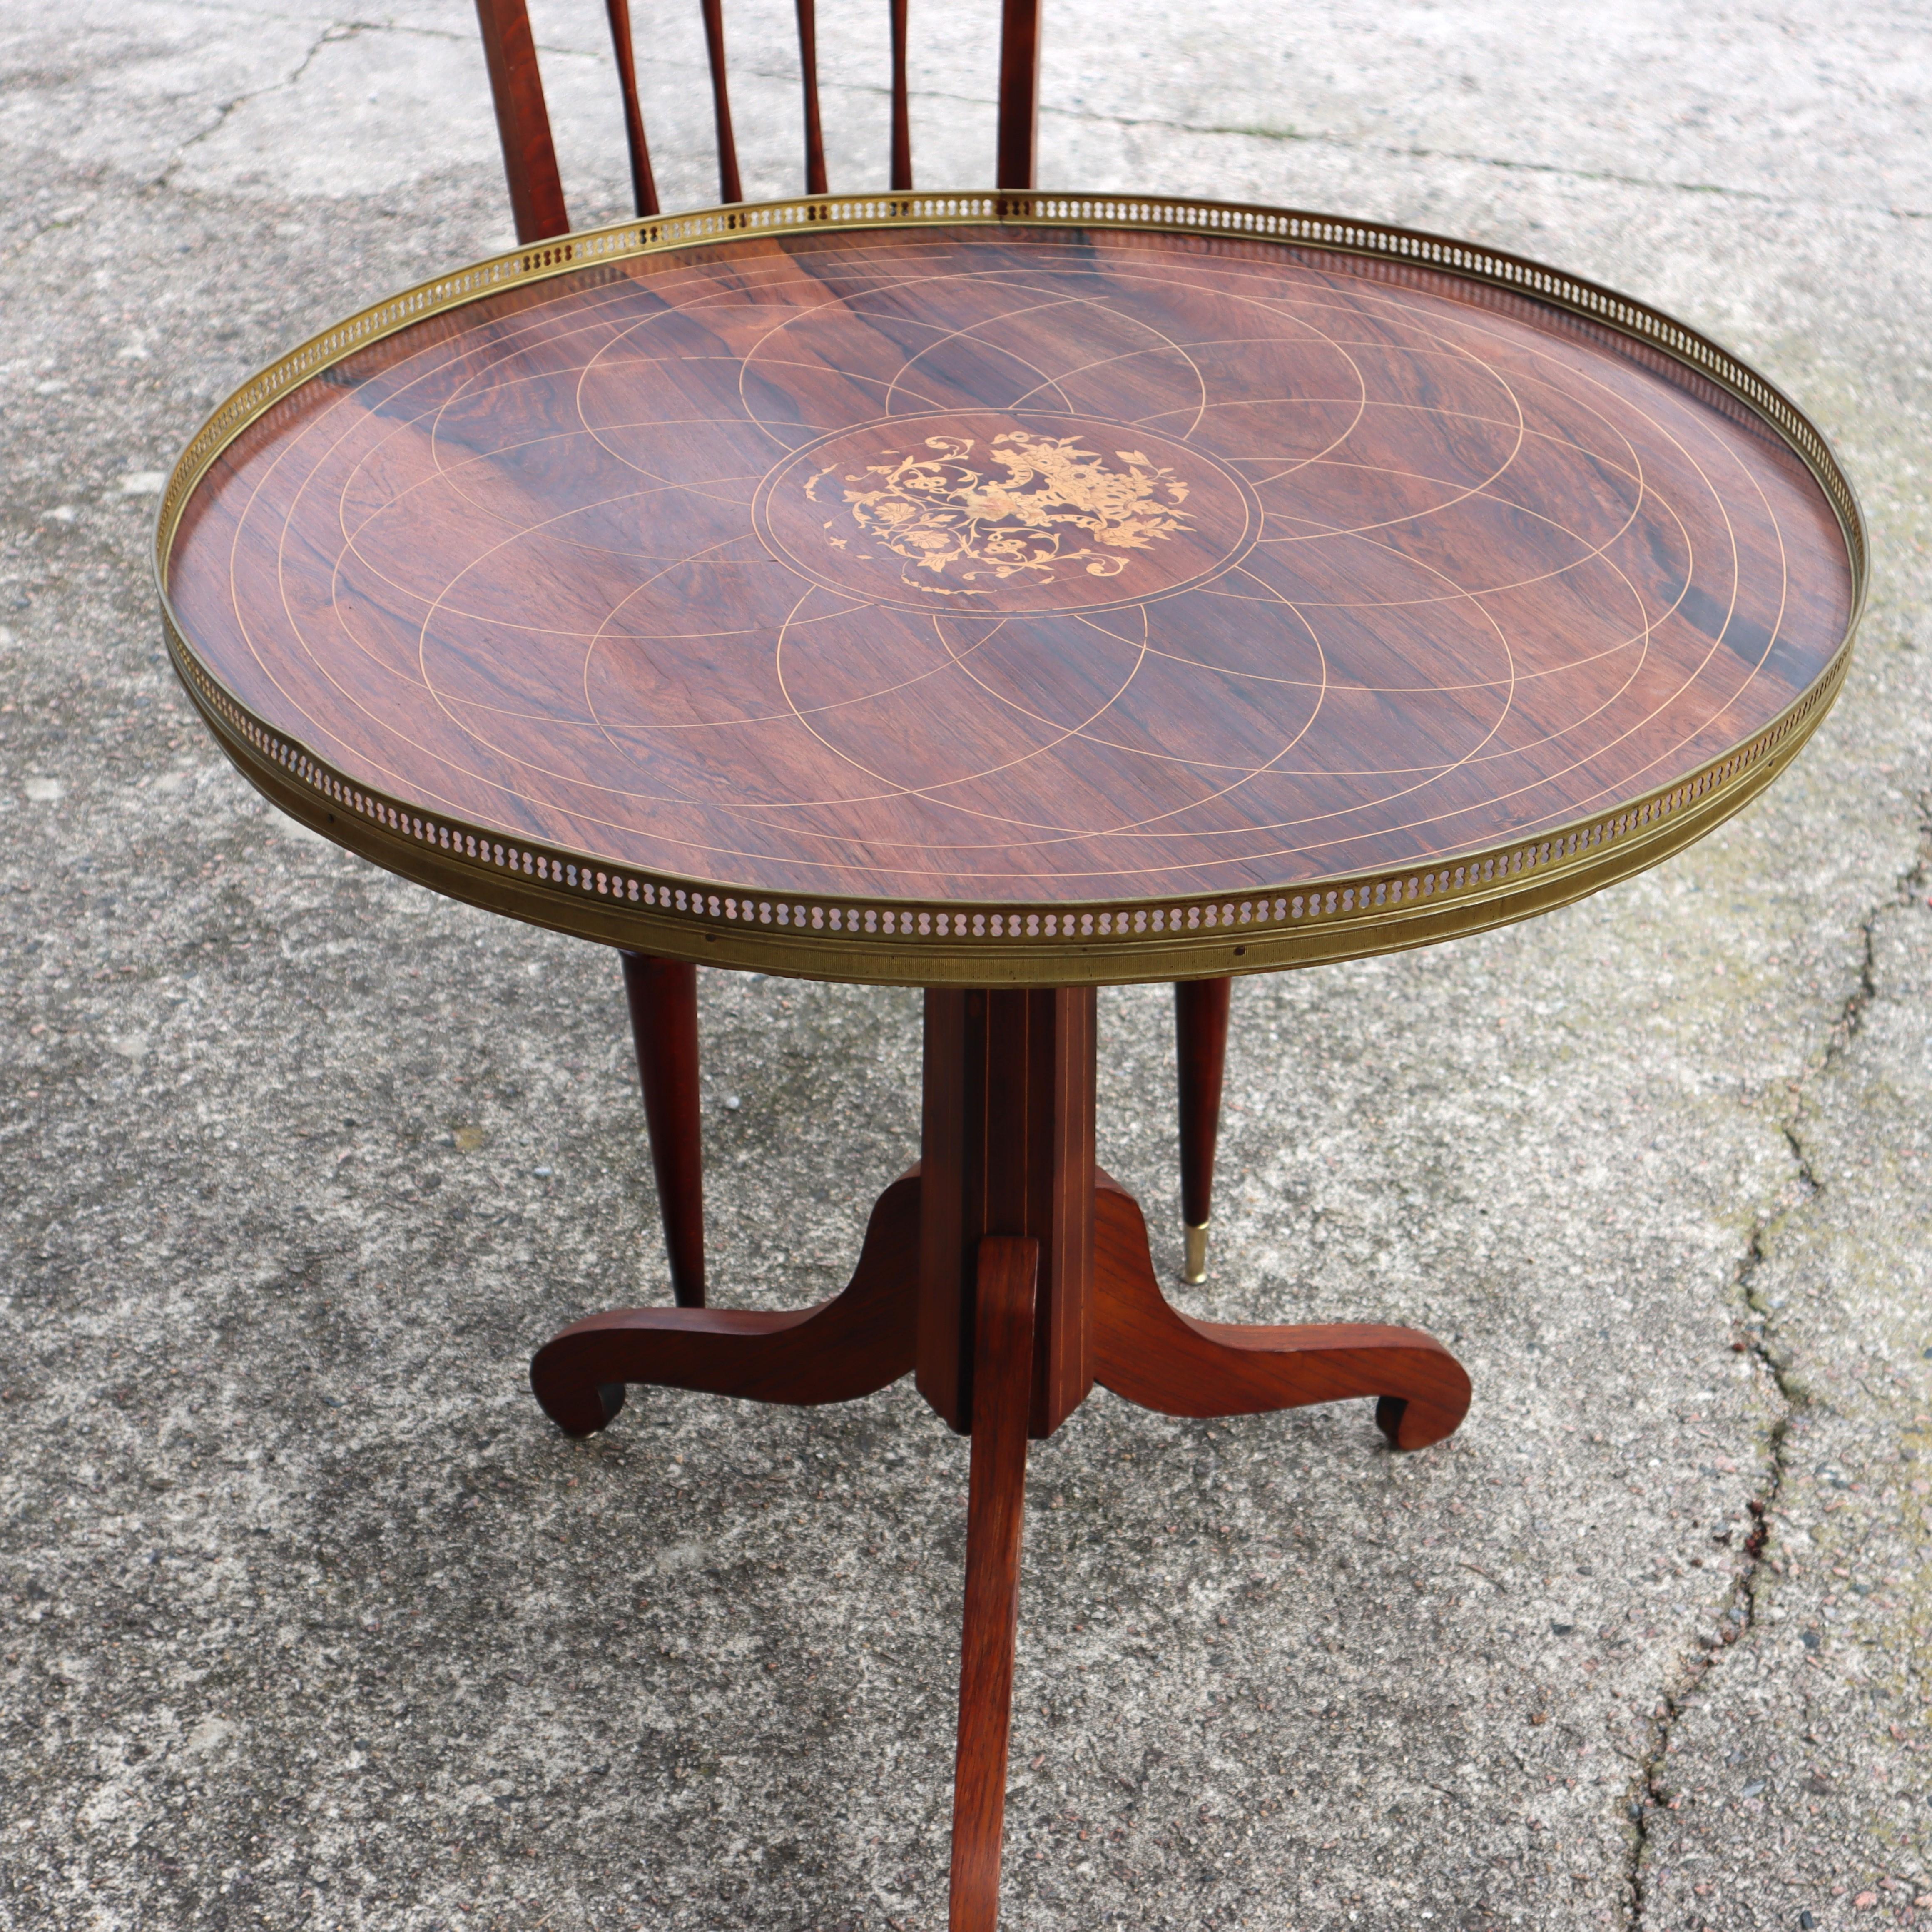 Vintage Neoclassical  Pedestal Table- Inlay work - Brass Gallery-60s In Good Condition For Sale In Bussiere Dunoise, Nouvel Aquitaine